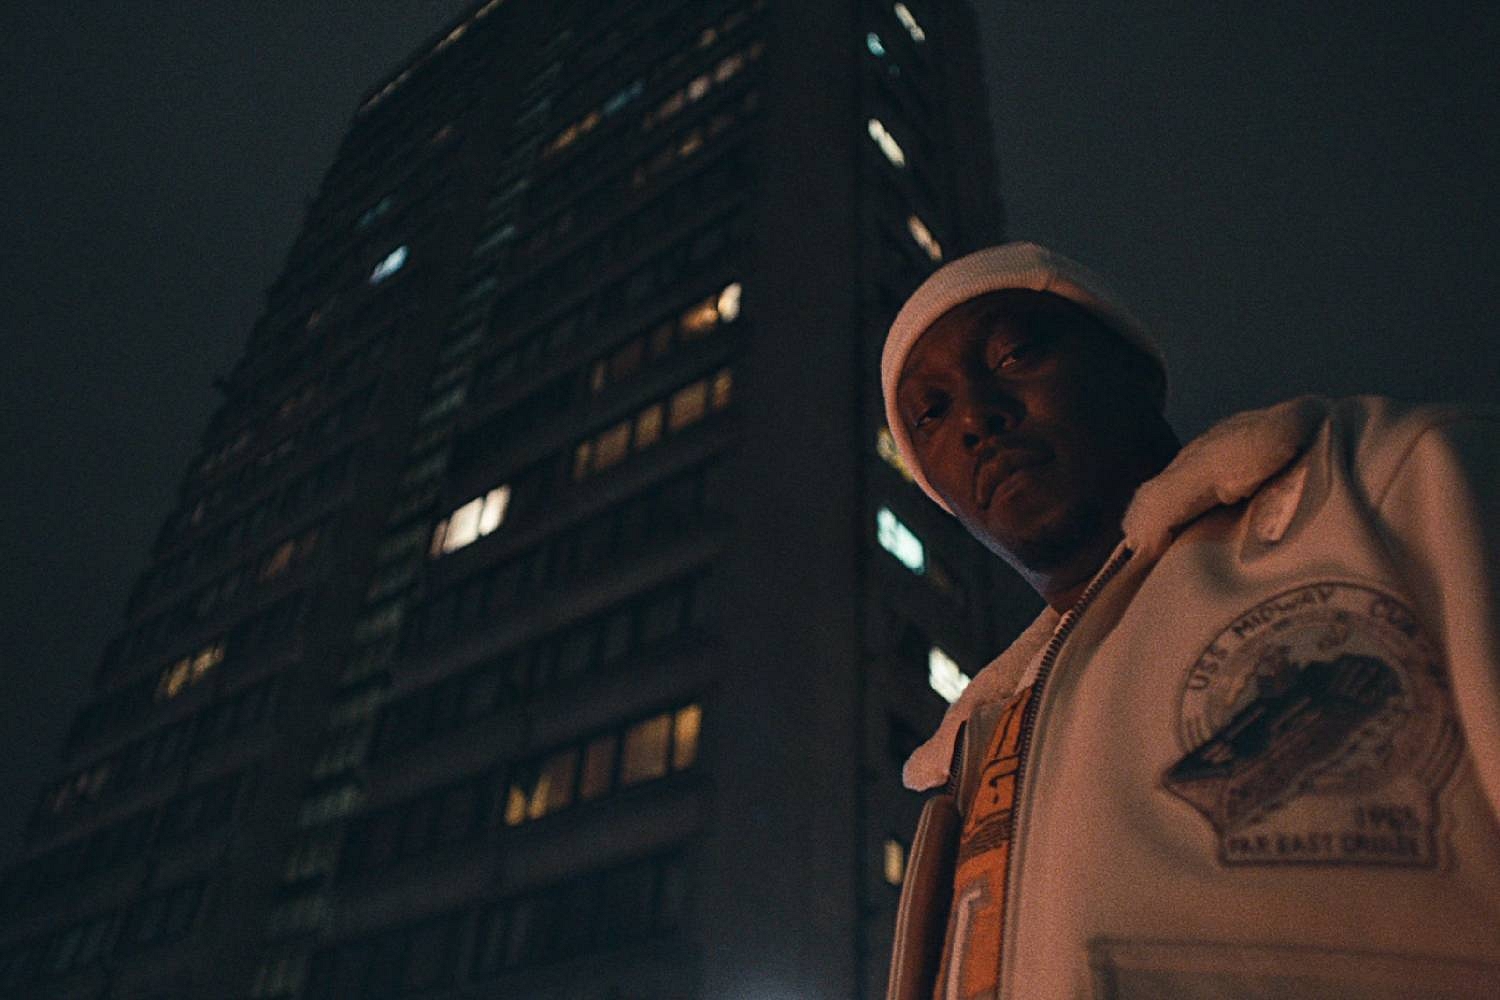 Dizzee Rascal shares new video for ‘Quality’